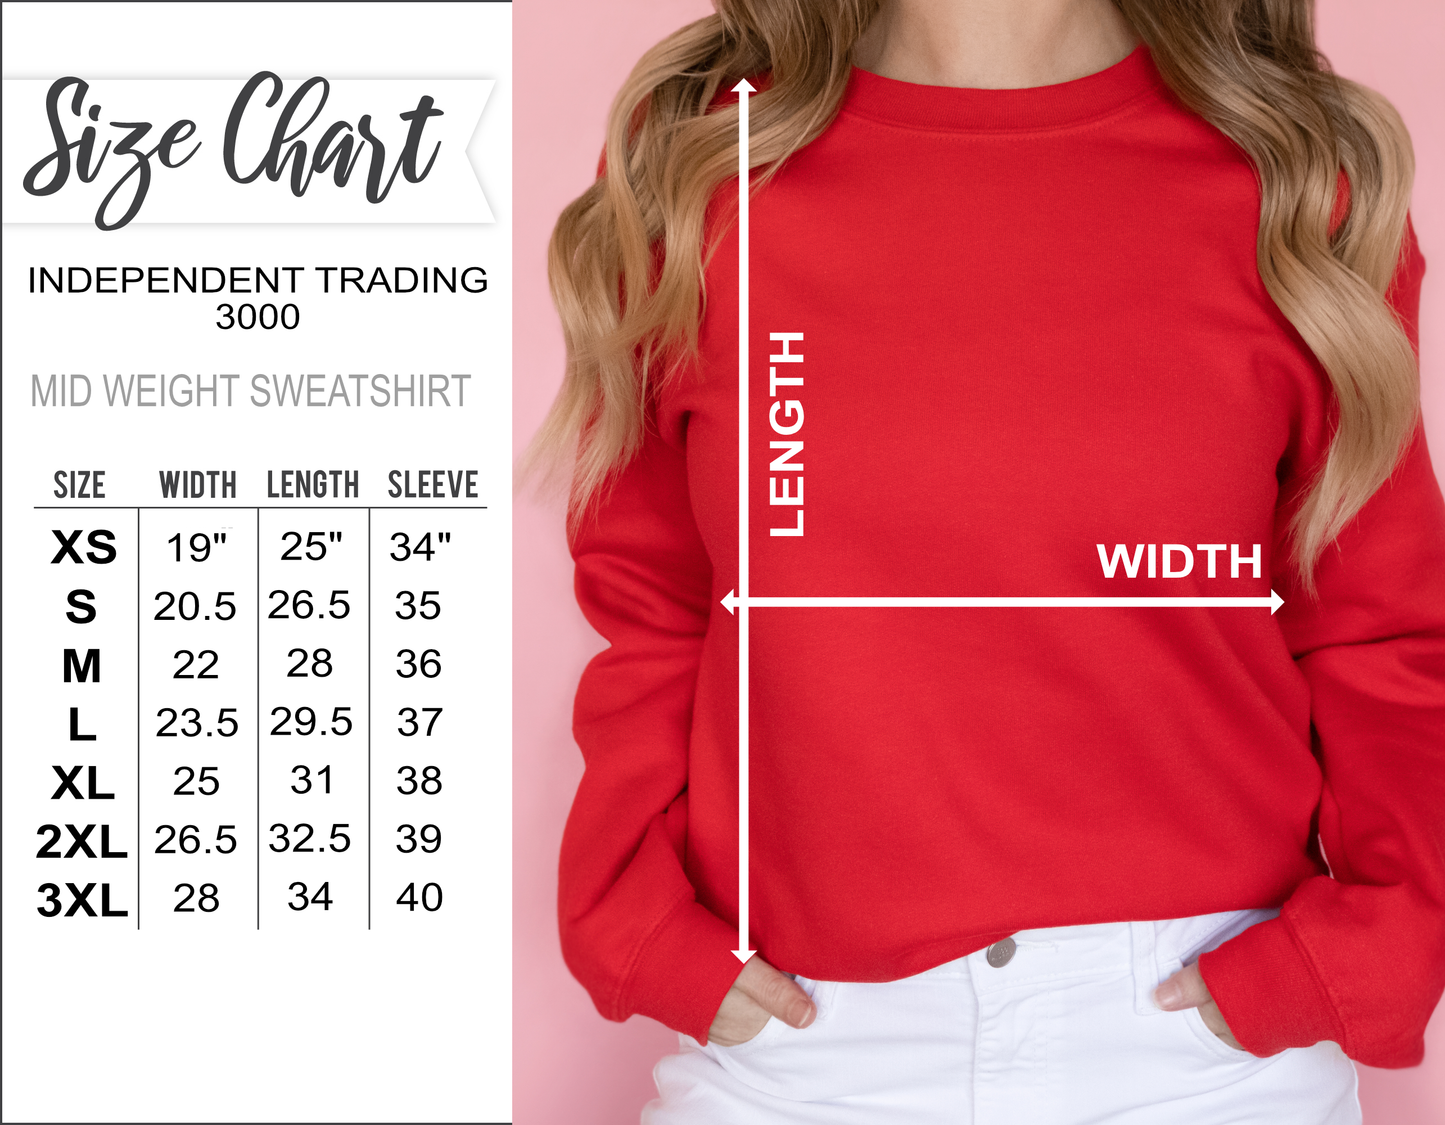 White Solid Color Independant Trading Company Sweatshirts | ADULT | ITC